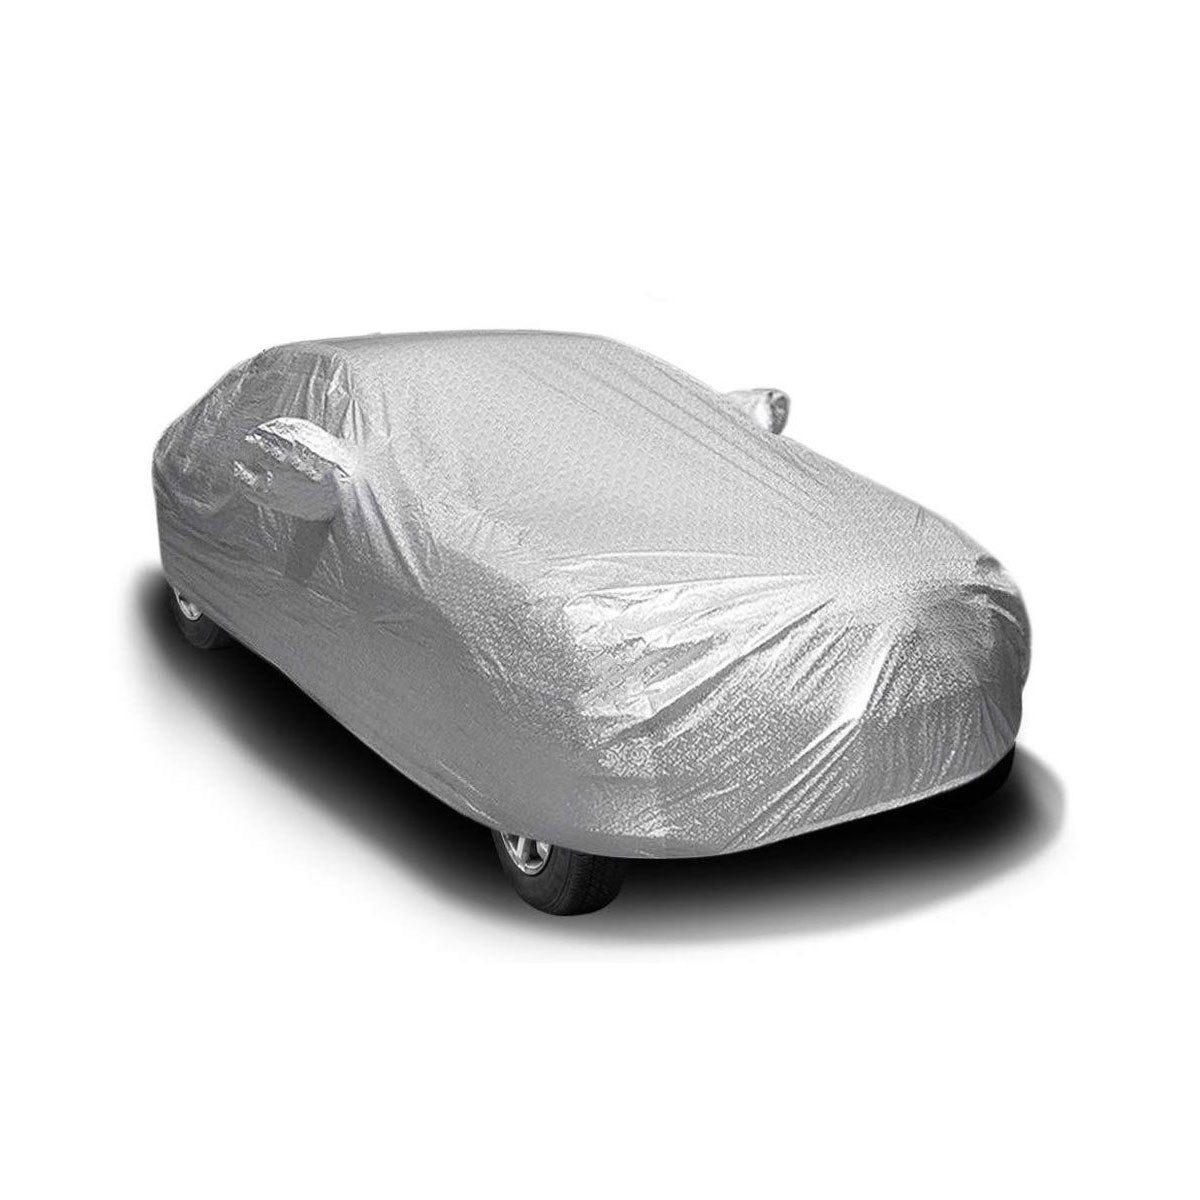 Oshotto Spyro Silver Anti Reflective, dustproof and Water Proof Car Body Cover with Mirror Pockets For Hyundai Elantra